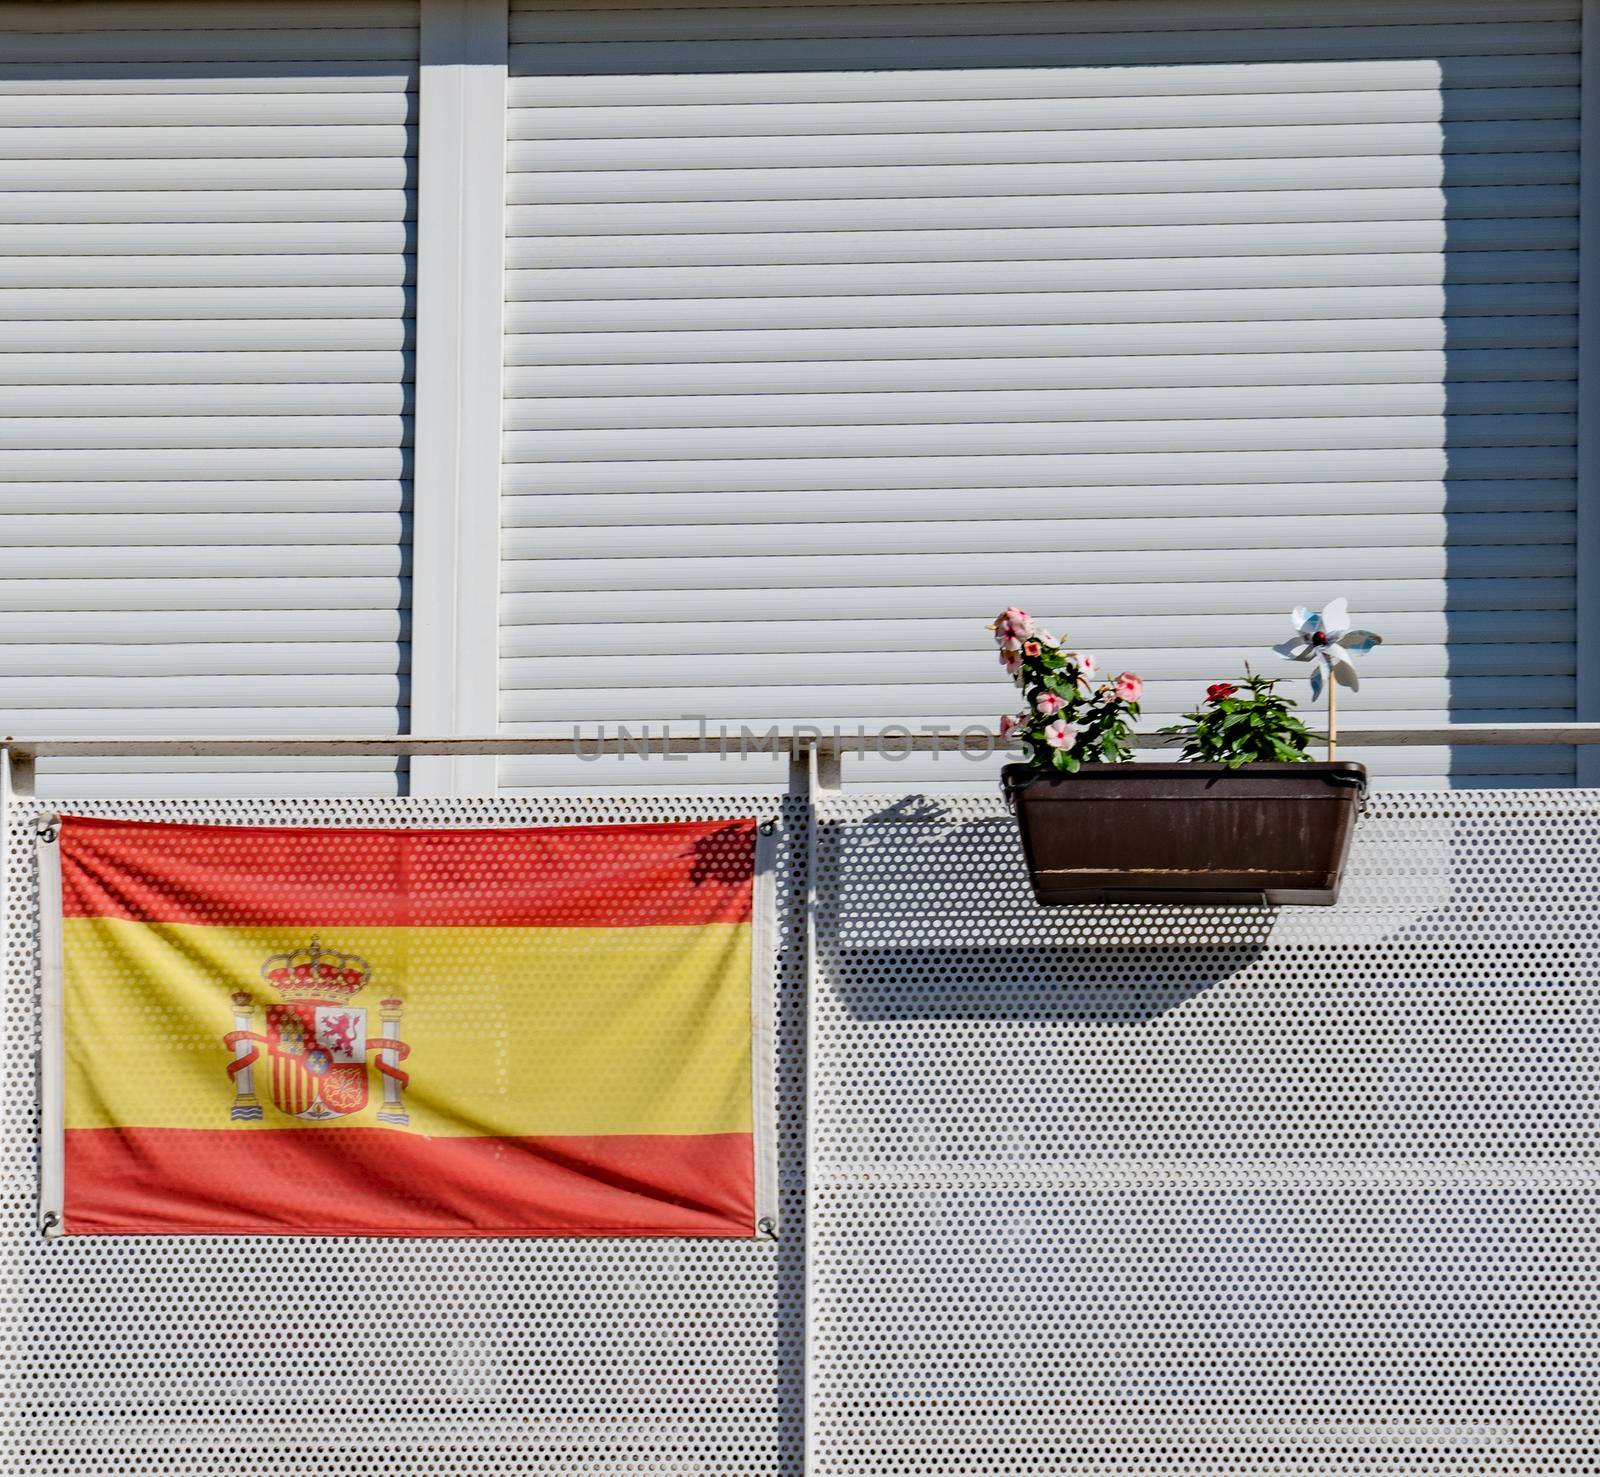 Spanish flag on a white color balcony and a plot with flowers by papatonic